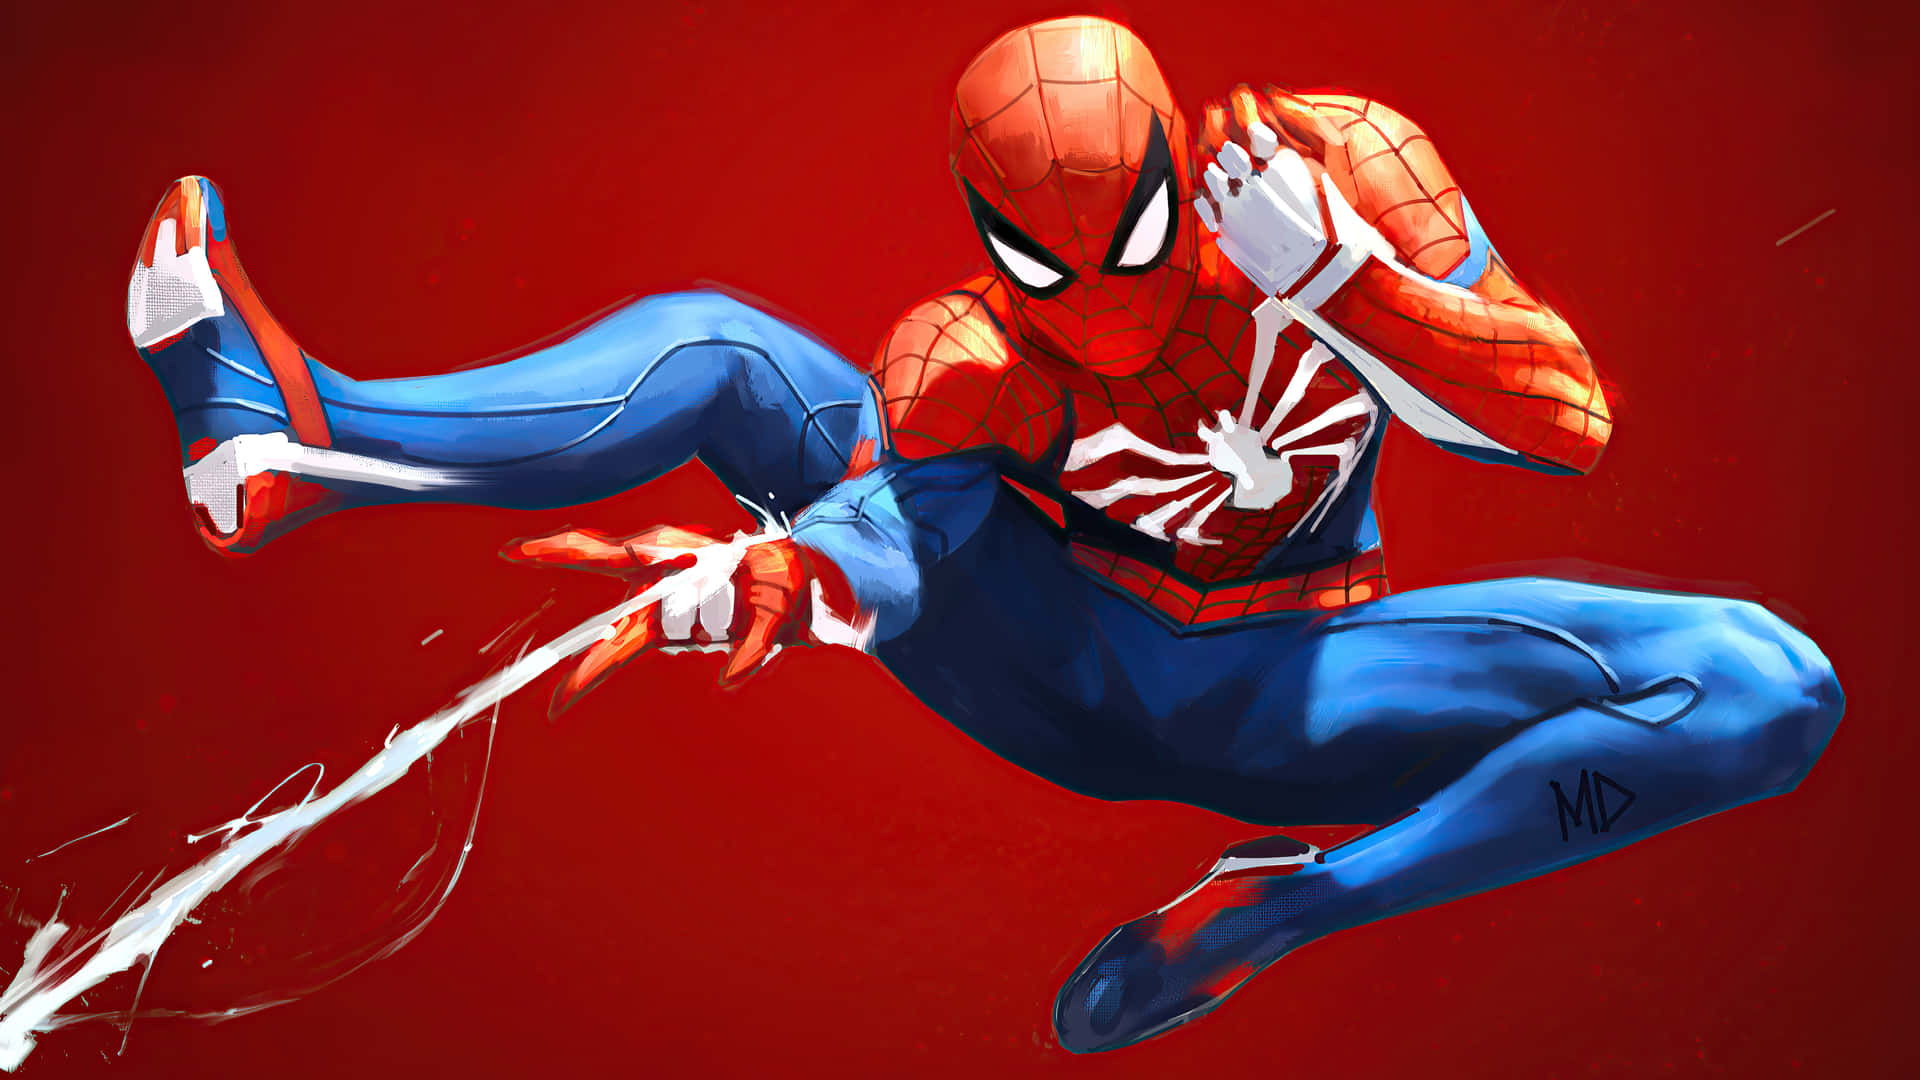 Spider-Man Web Shooter in action Wallpaper